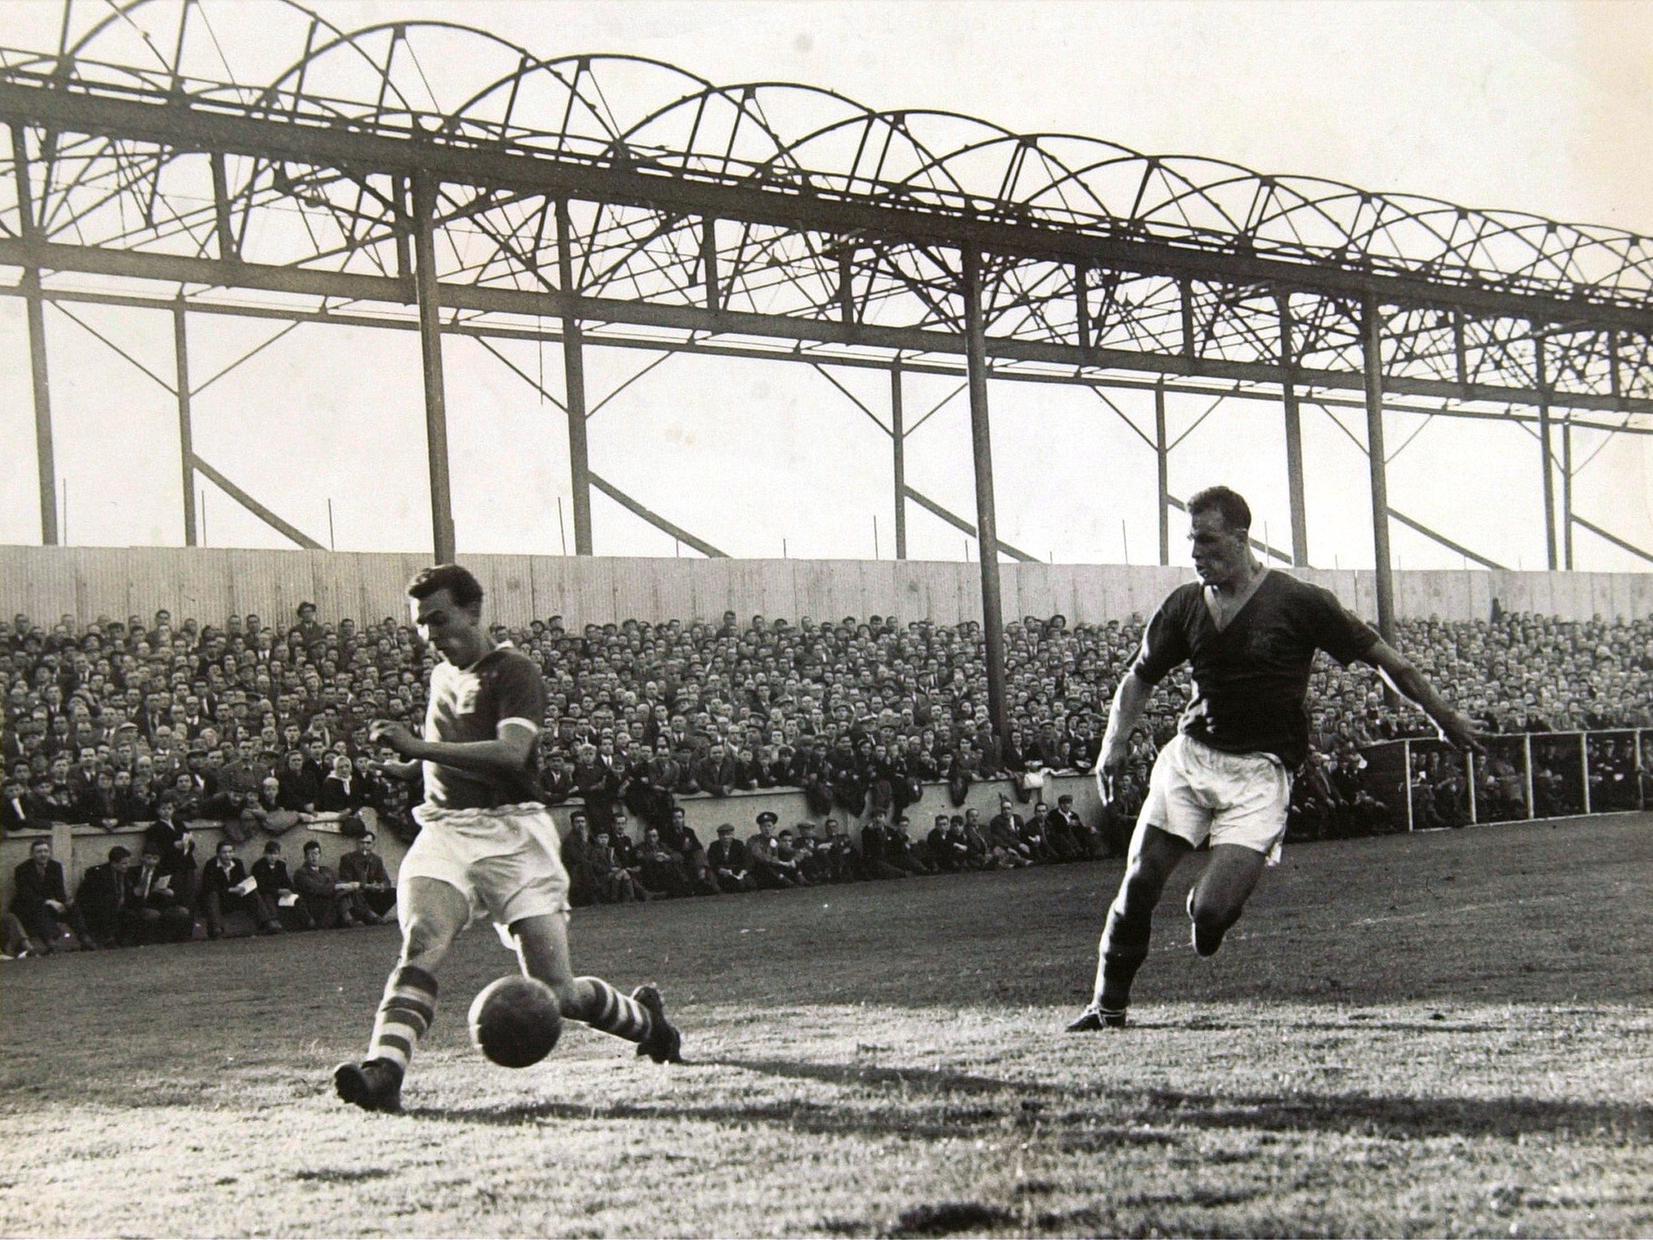 John Charles, in action in the game against Birmingham City at Elland Road soon after the fire that decimated the Main Stand in September 1956.